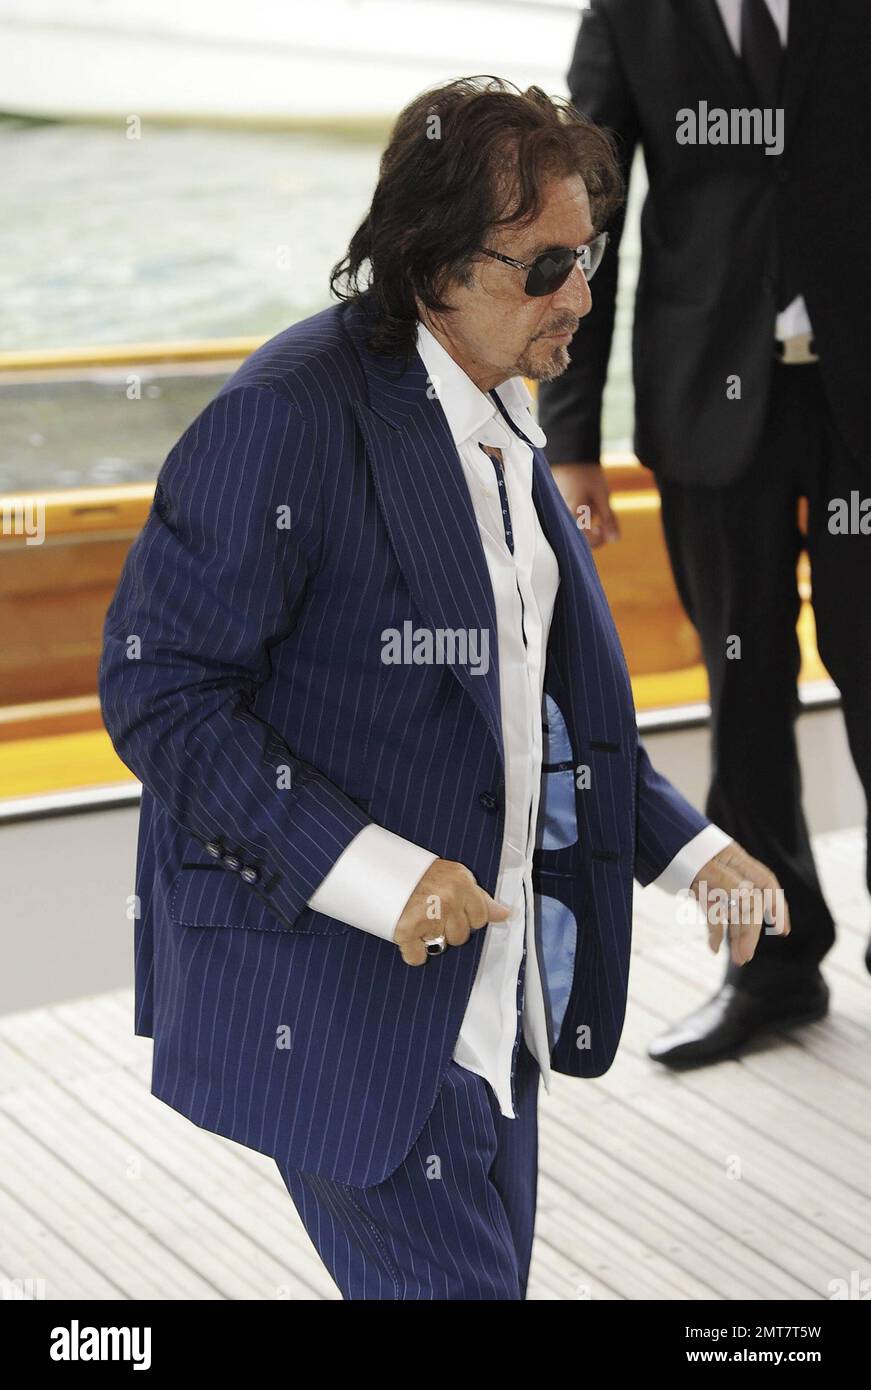 Al Pacino arrives at The 68th Annual Venice Film Festival for the Jaeger Le Coultre Glory to the Filmmaker Award Ceremony and his documentary "Wild Salome" Photocall. Venice, Italy. 4th September 2011. Stock Photo